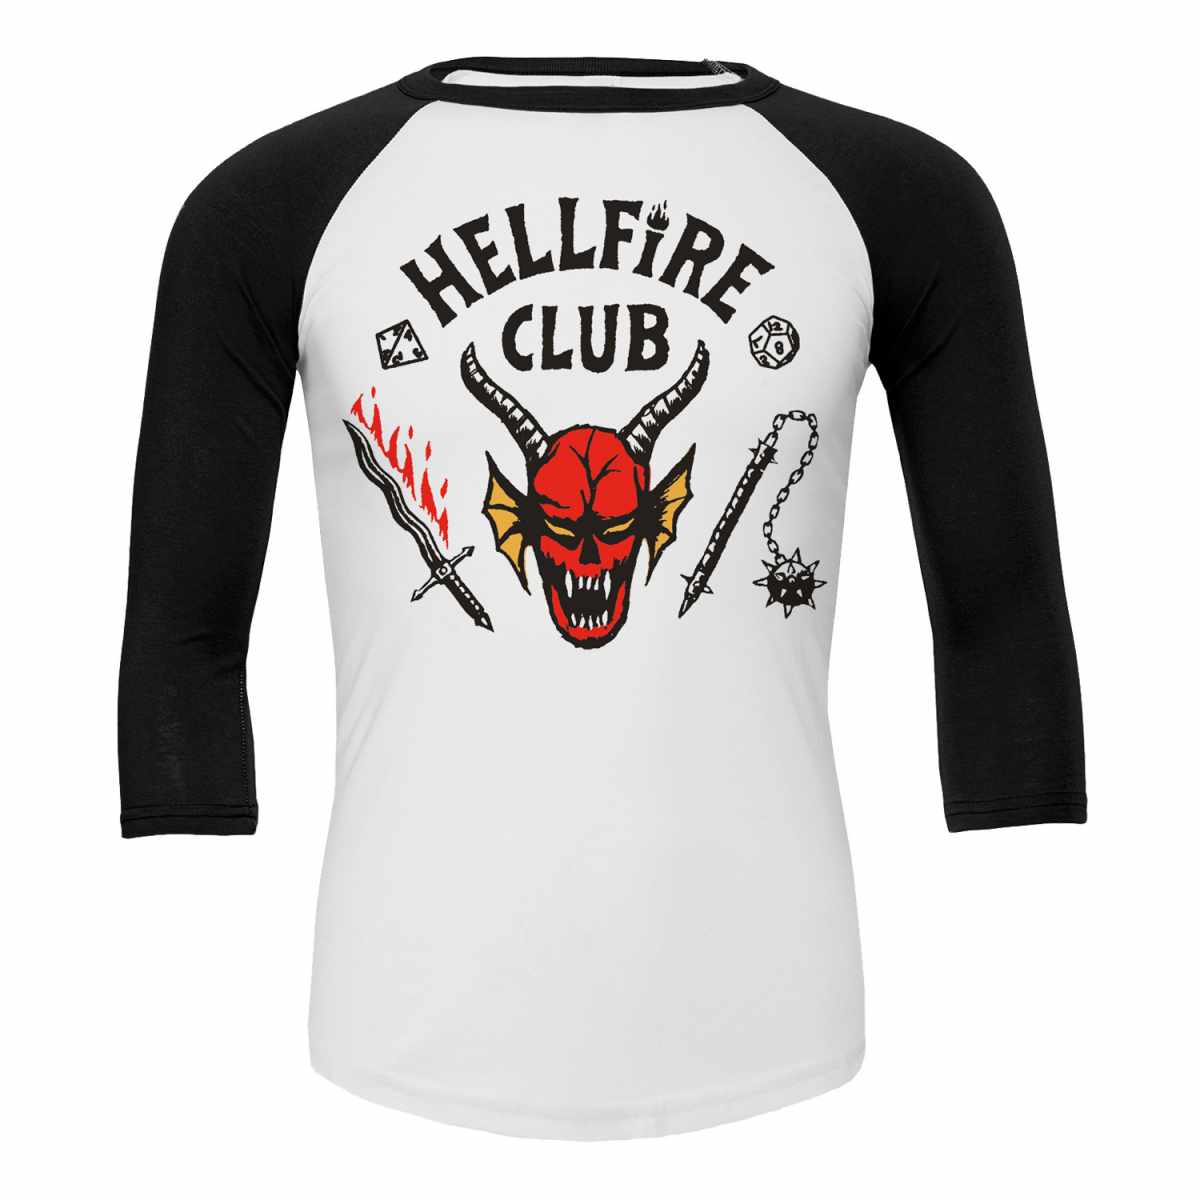 Three-quarter sleeve raglan t-shirt with 'Hellfire Club' logo from Stranger Things in white and black colors